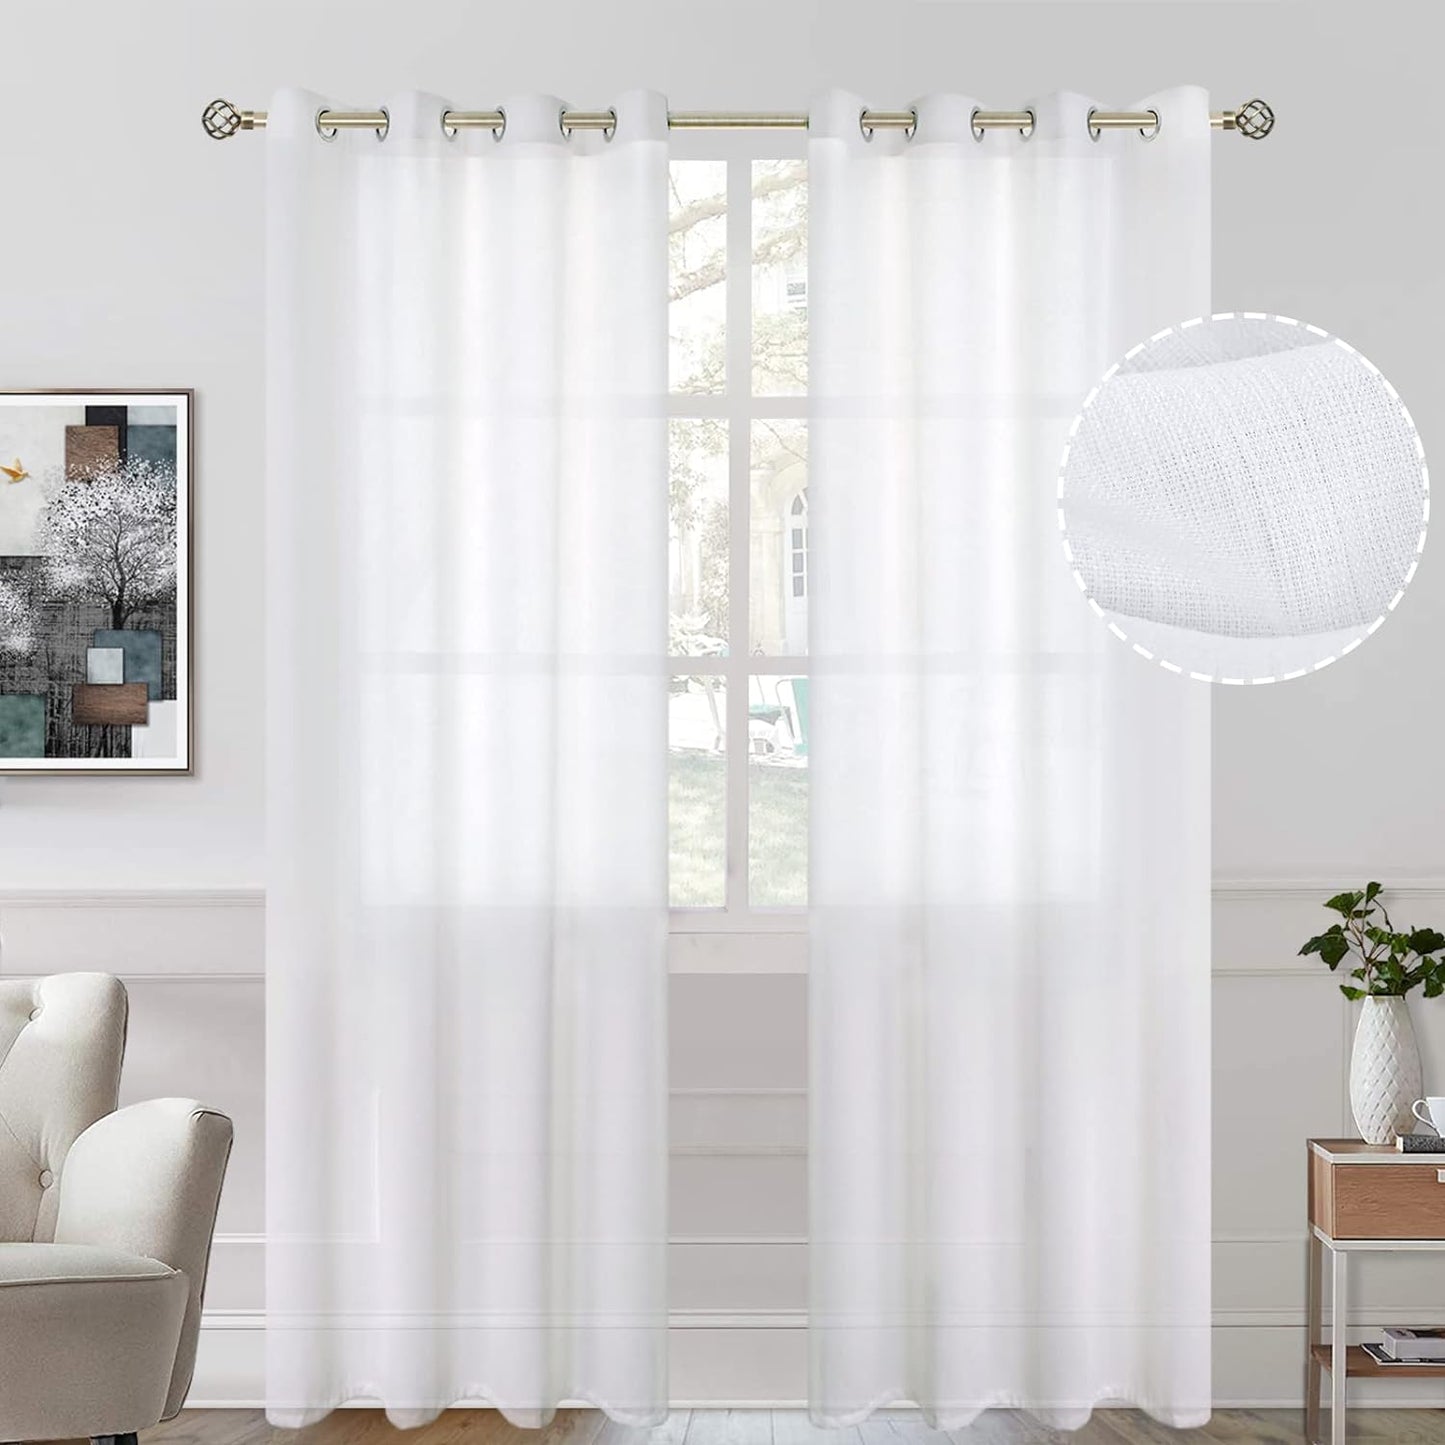 Bgment Natural Linen Look Semi Sheer Curtains for Bedroom, 52 X 54 Inch White Grommet Light Filtering Casual Textured Privacy Curtains for Bay Window, 2 Panels  BGment White 52W X 120L 